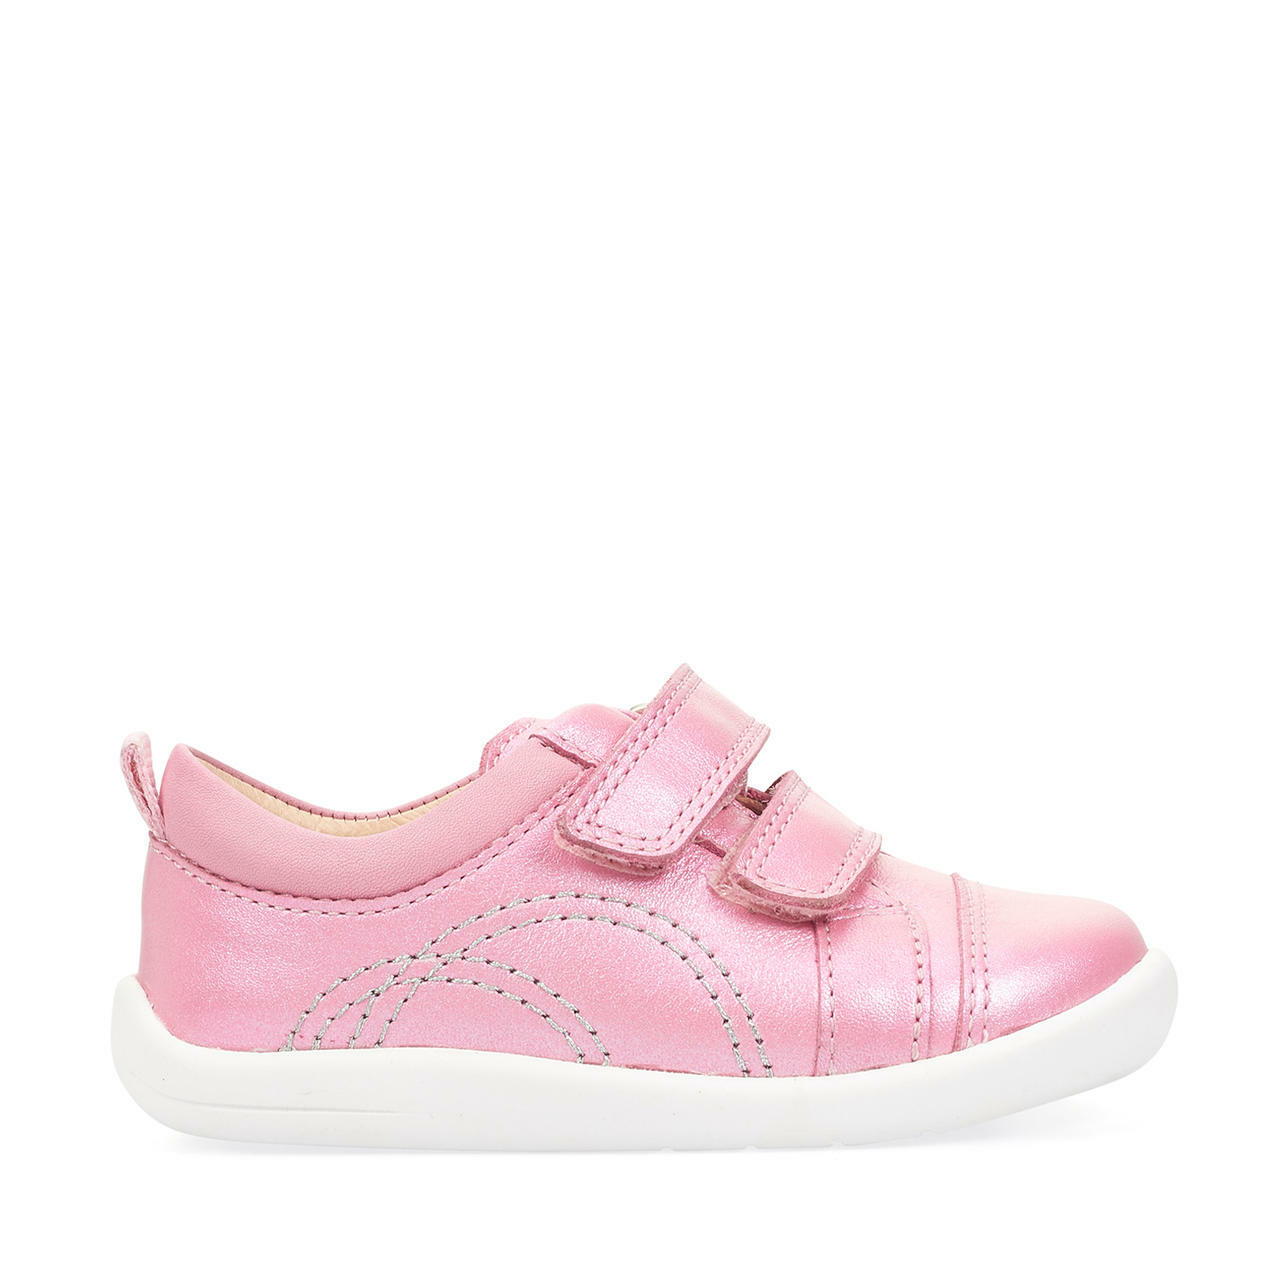 A girls casual shoe by Start Rite,style Tree House, in Pink leather with double velcro fastening.